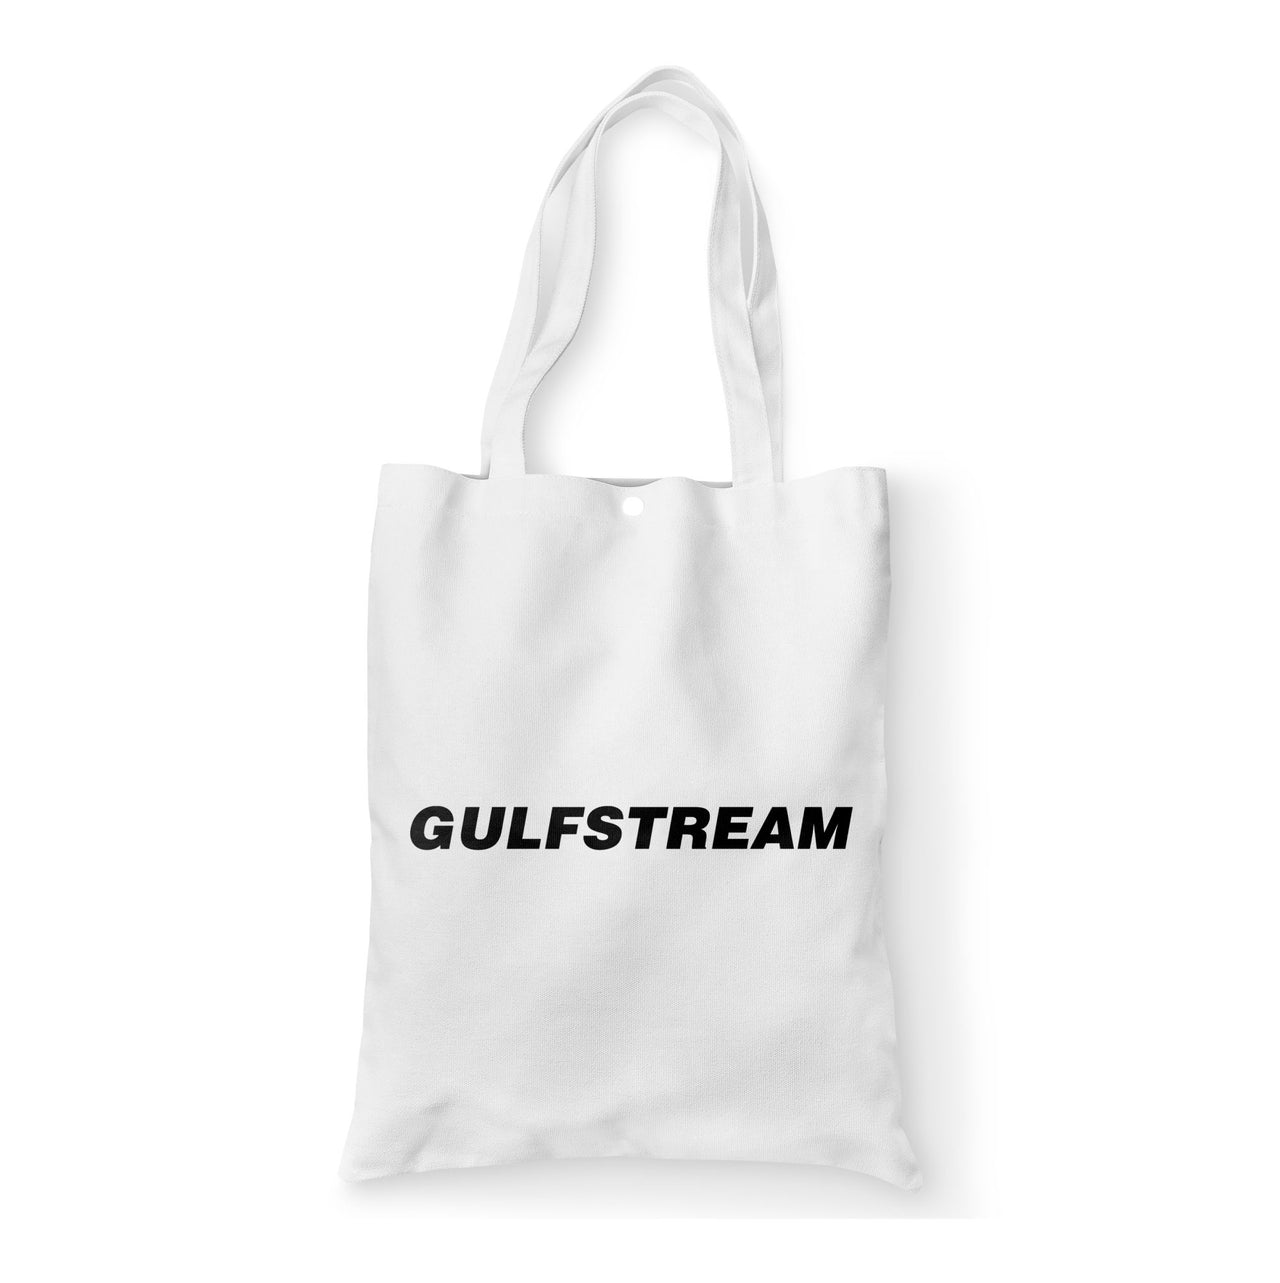 Gulfstream & Text Designed Tote Bags